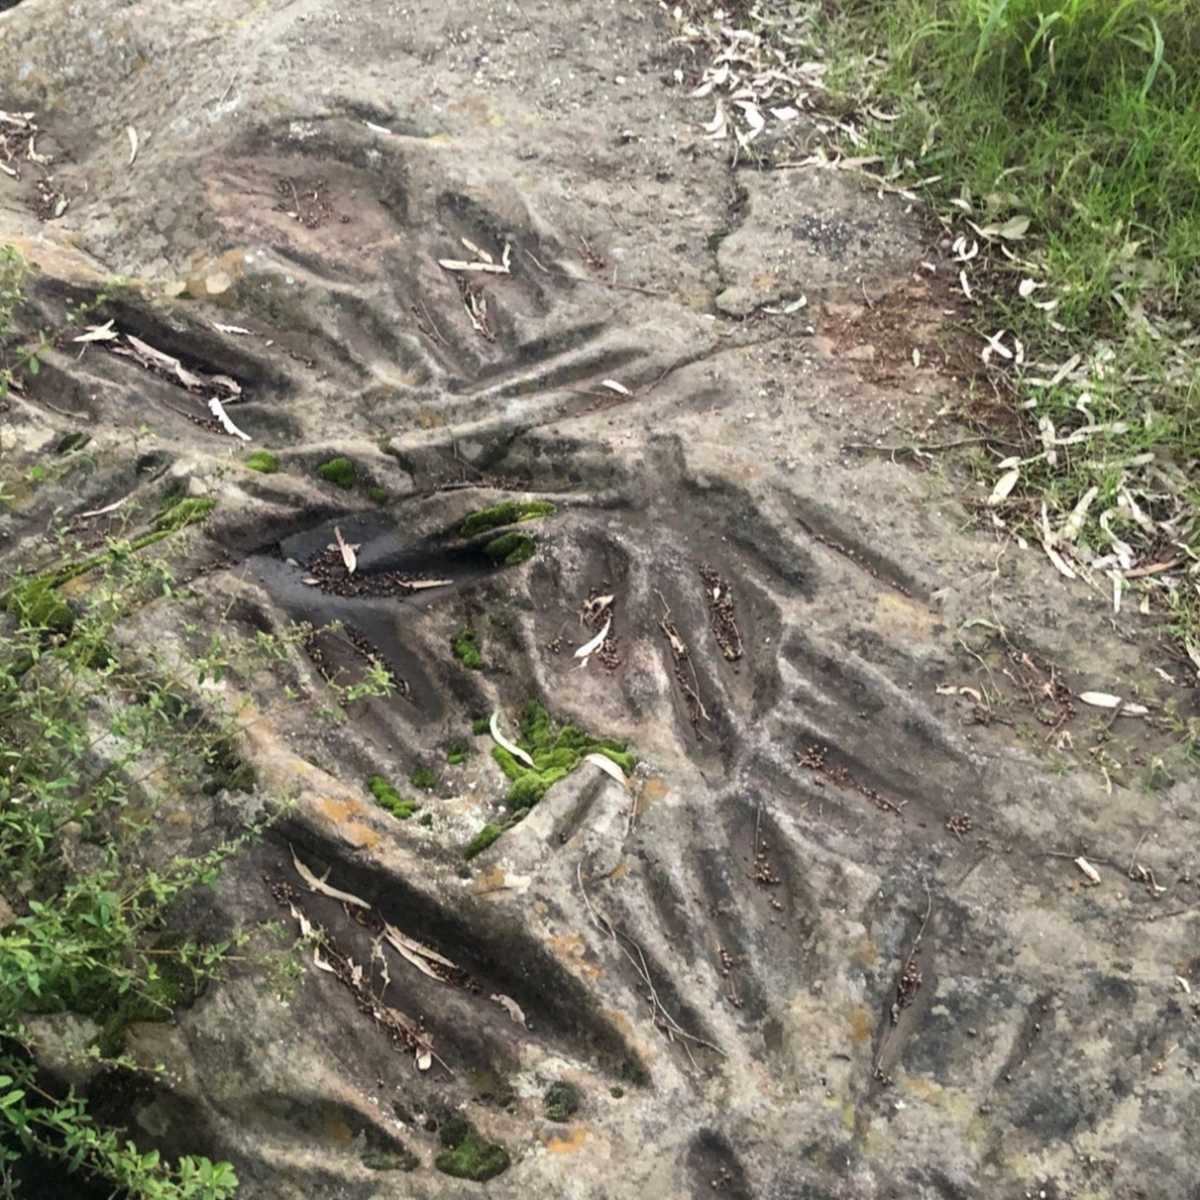 Axe-shaping carving grooves in rock